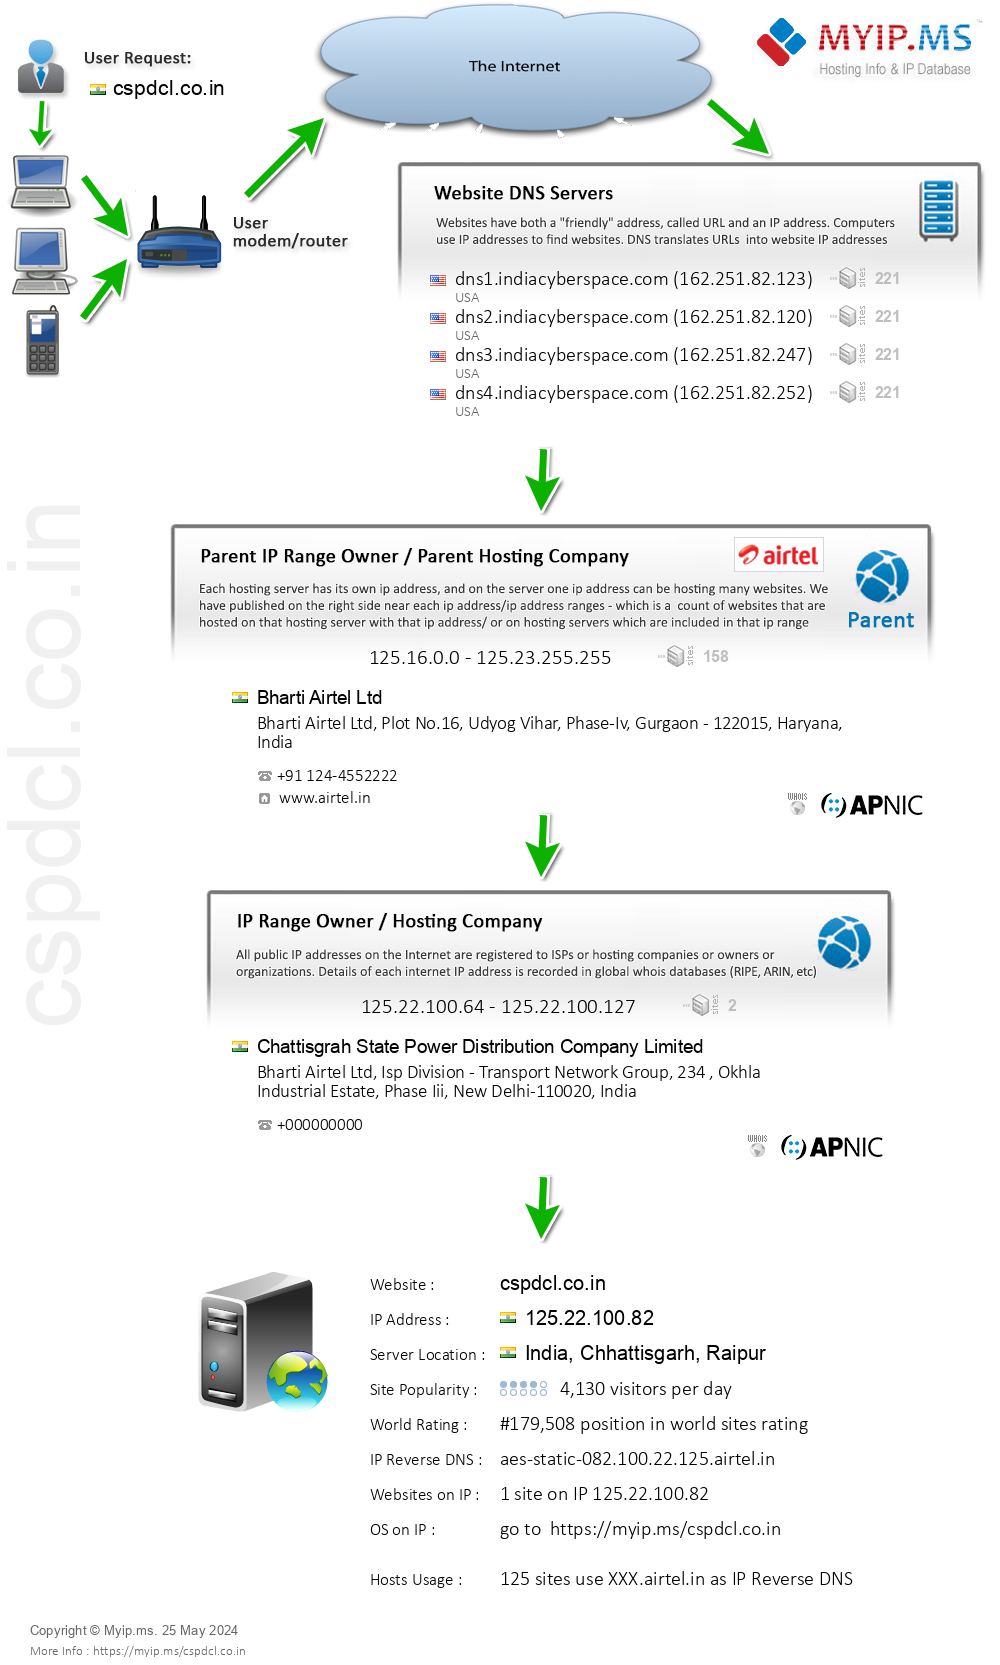 Cspdcl.co.in - Website Hosting Visual IP Diagram